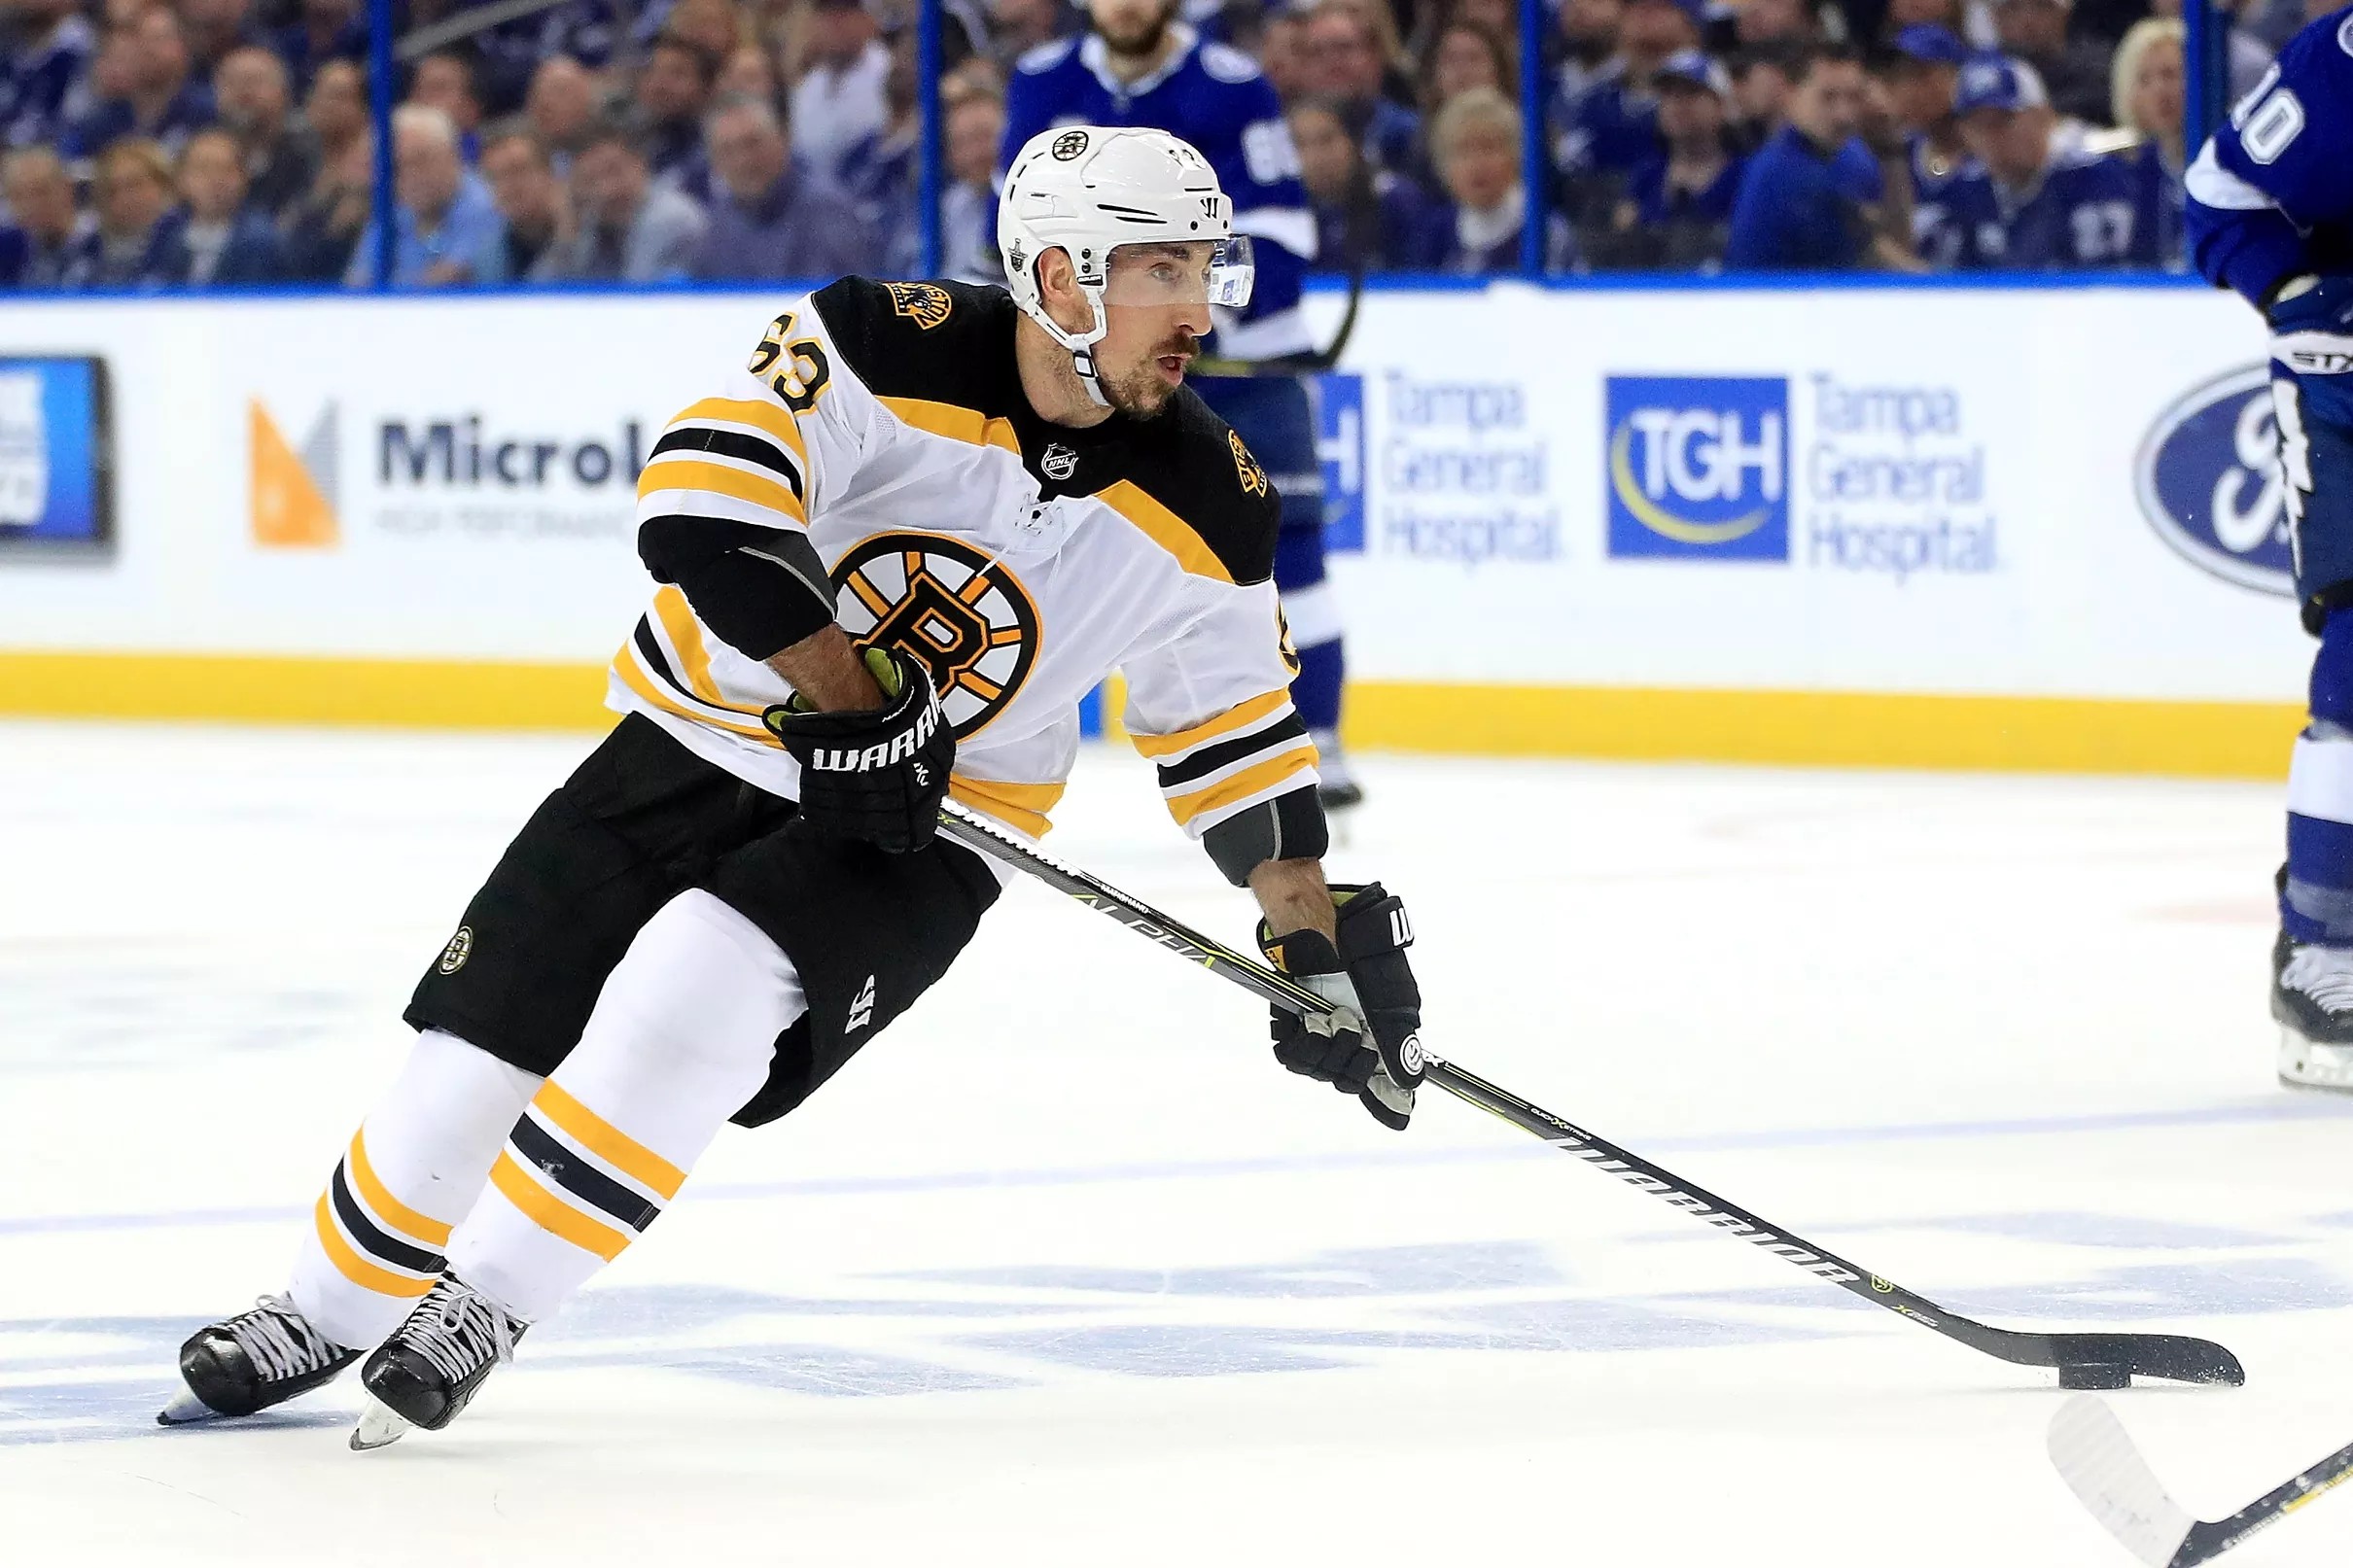 How to follow the Bruins preseason games TV, radio and more